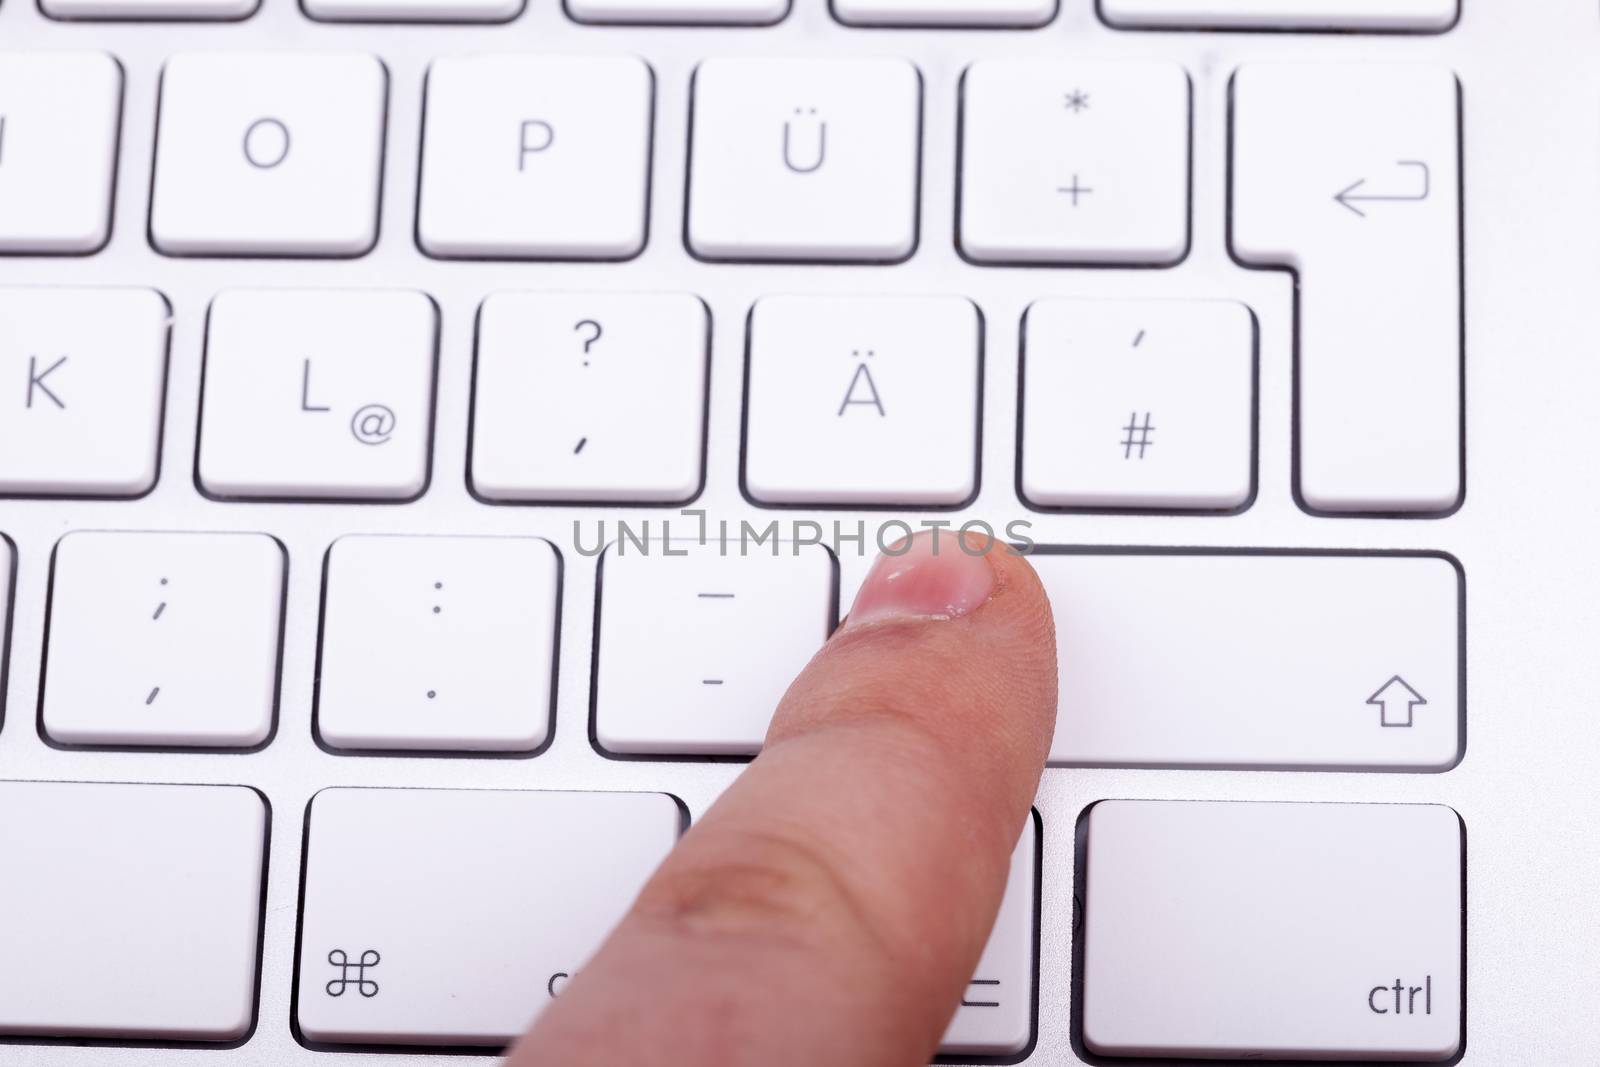 Finger pressing on keyboard key in close up